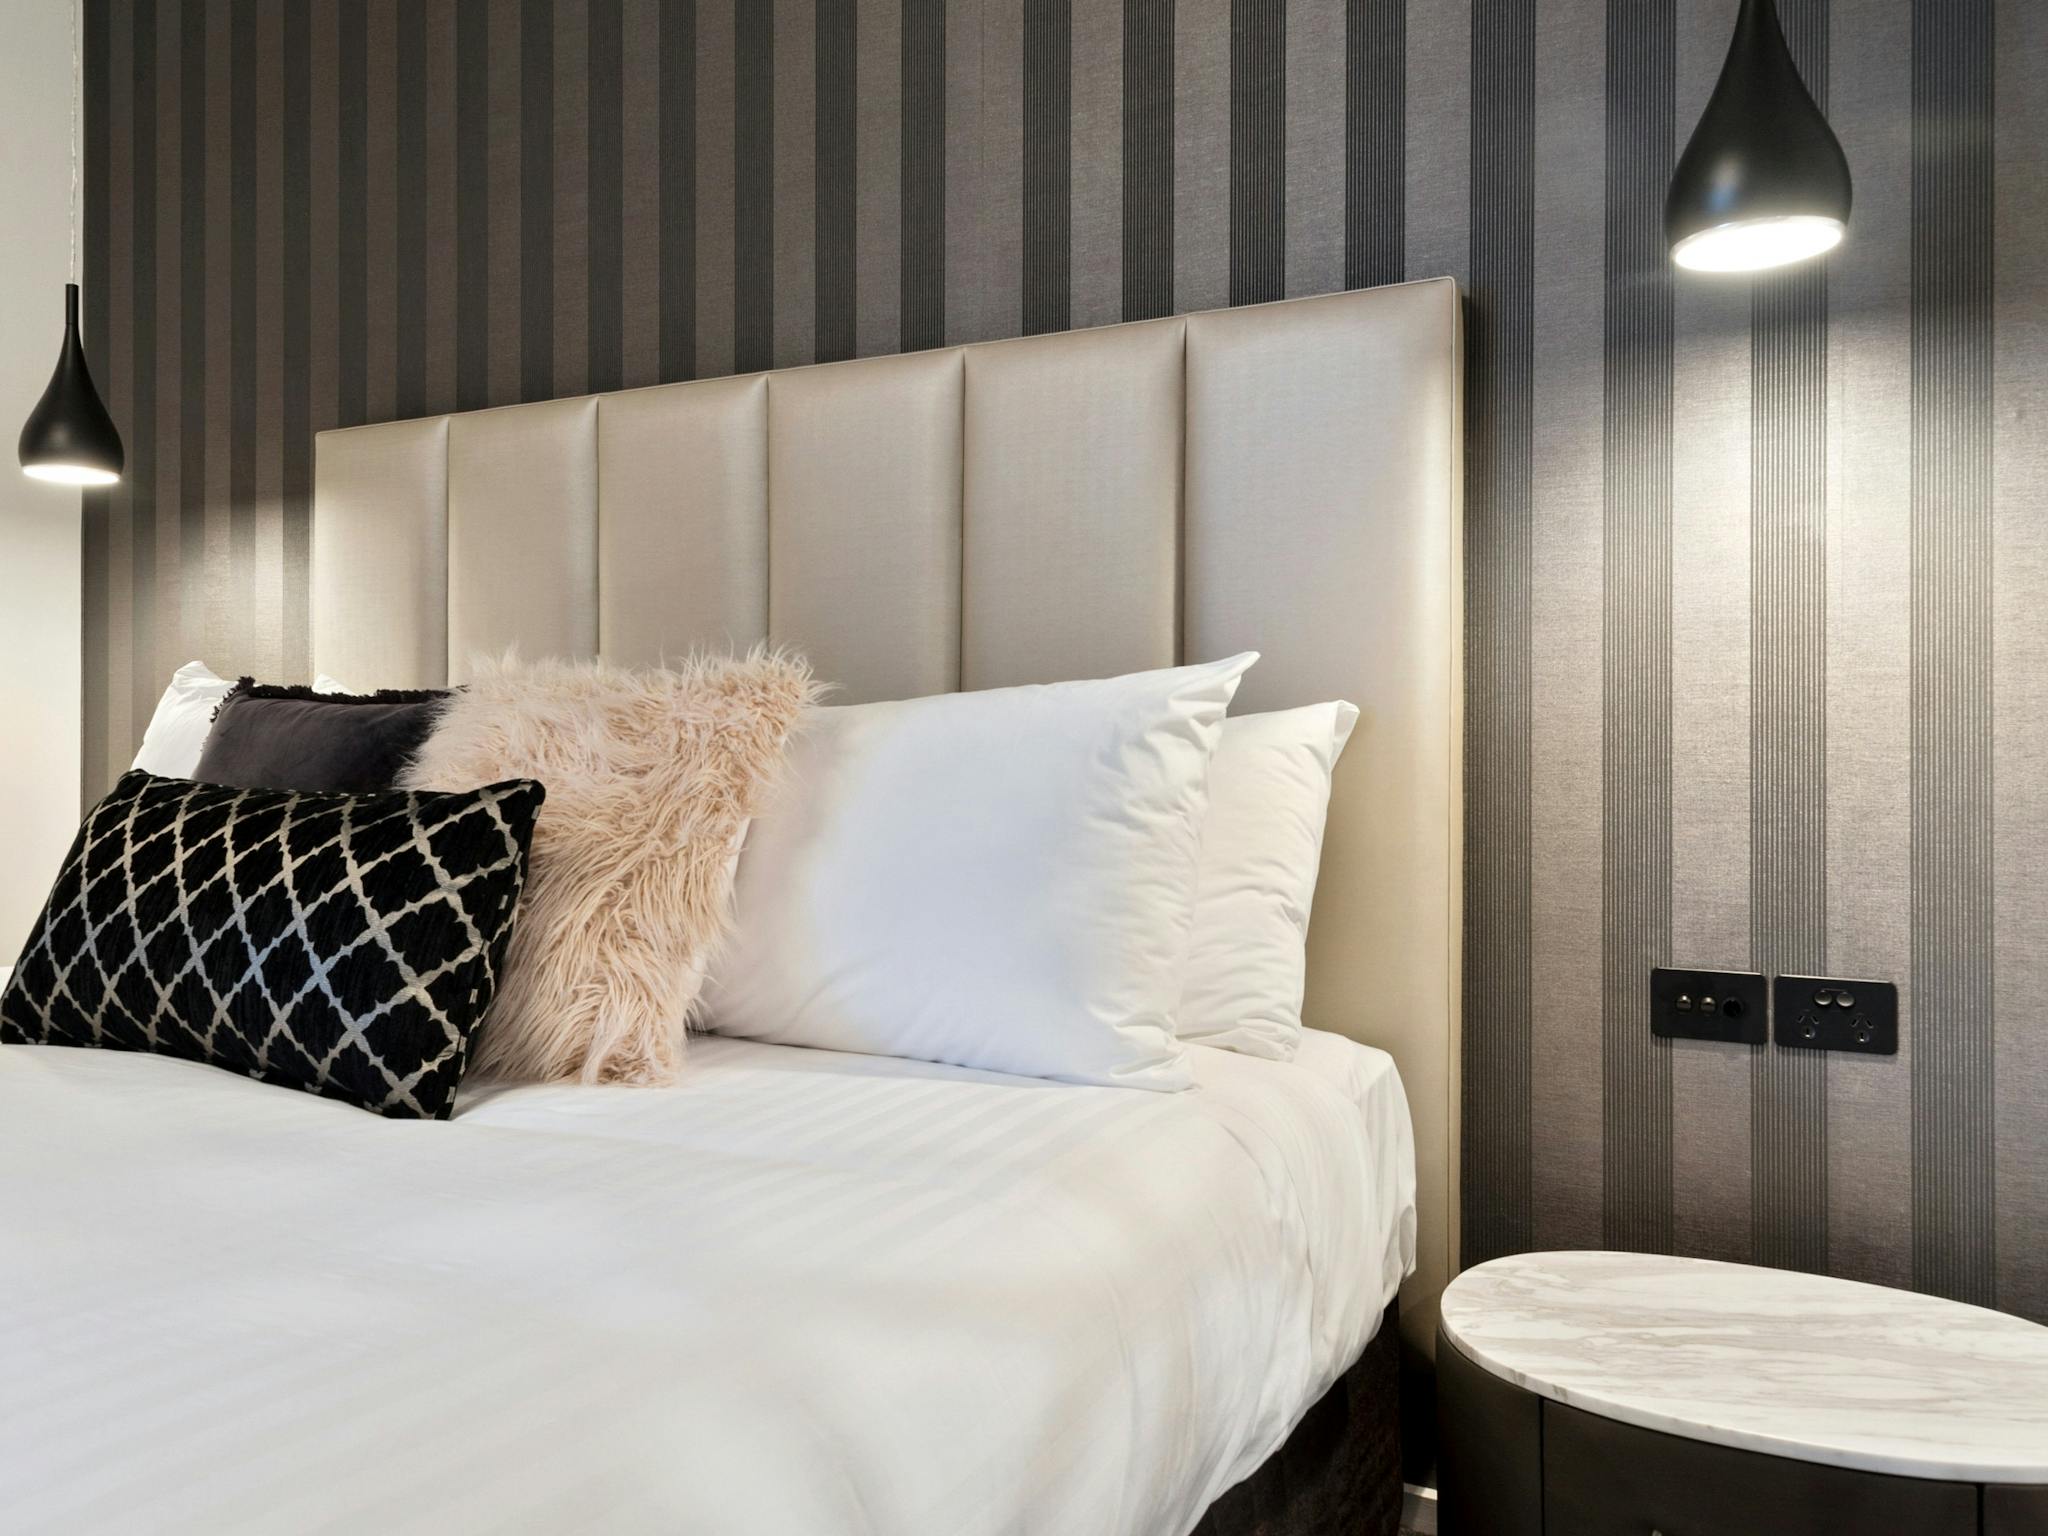 The Gateway's Studio Spa Apartment offers a king size bed and stylish, cosy appointments